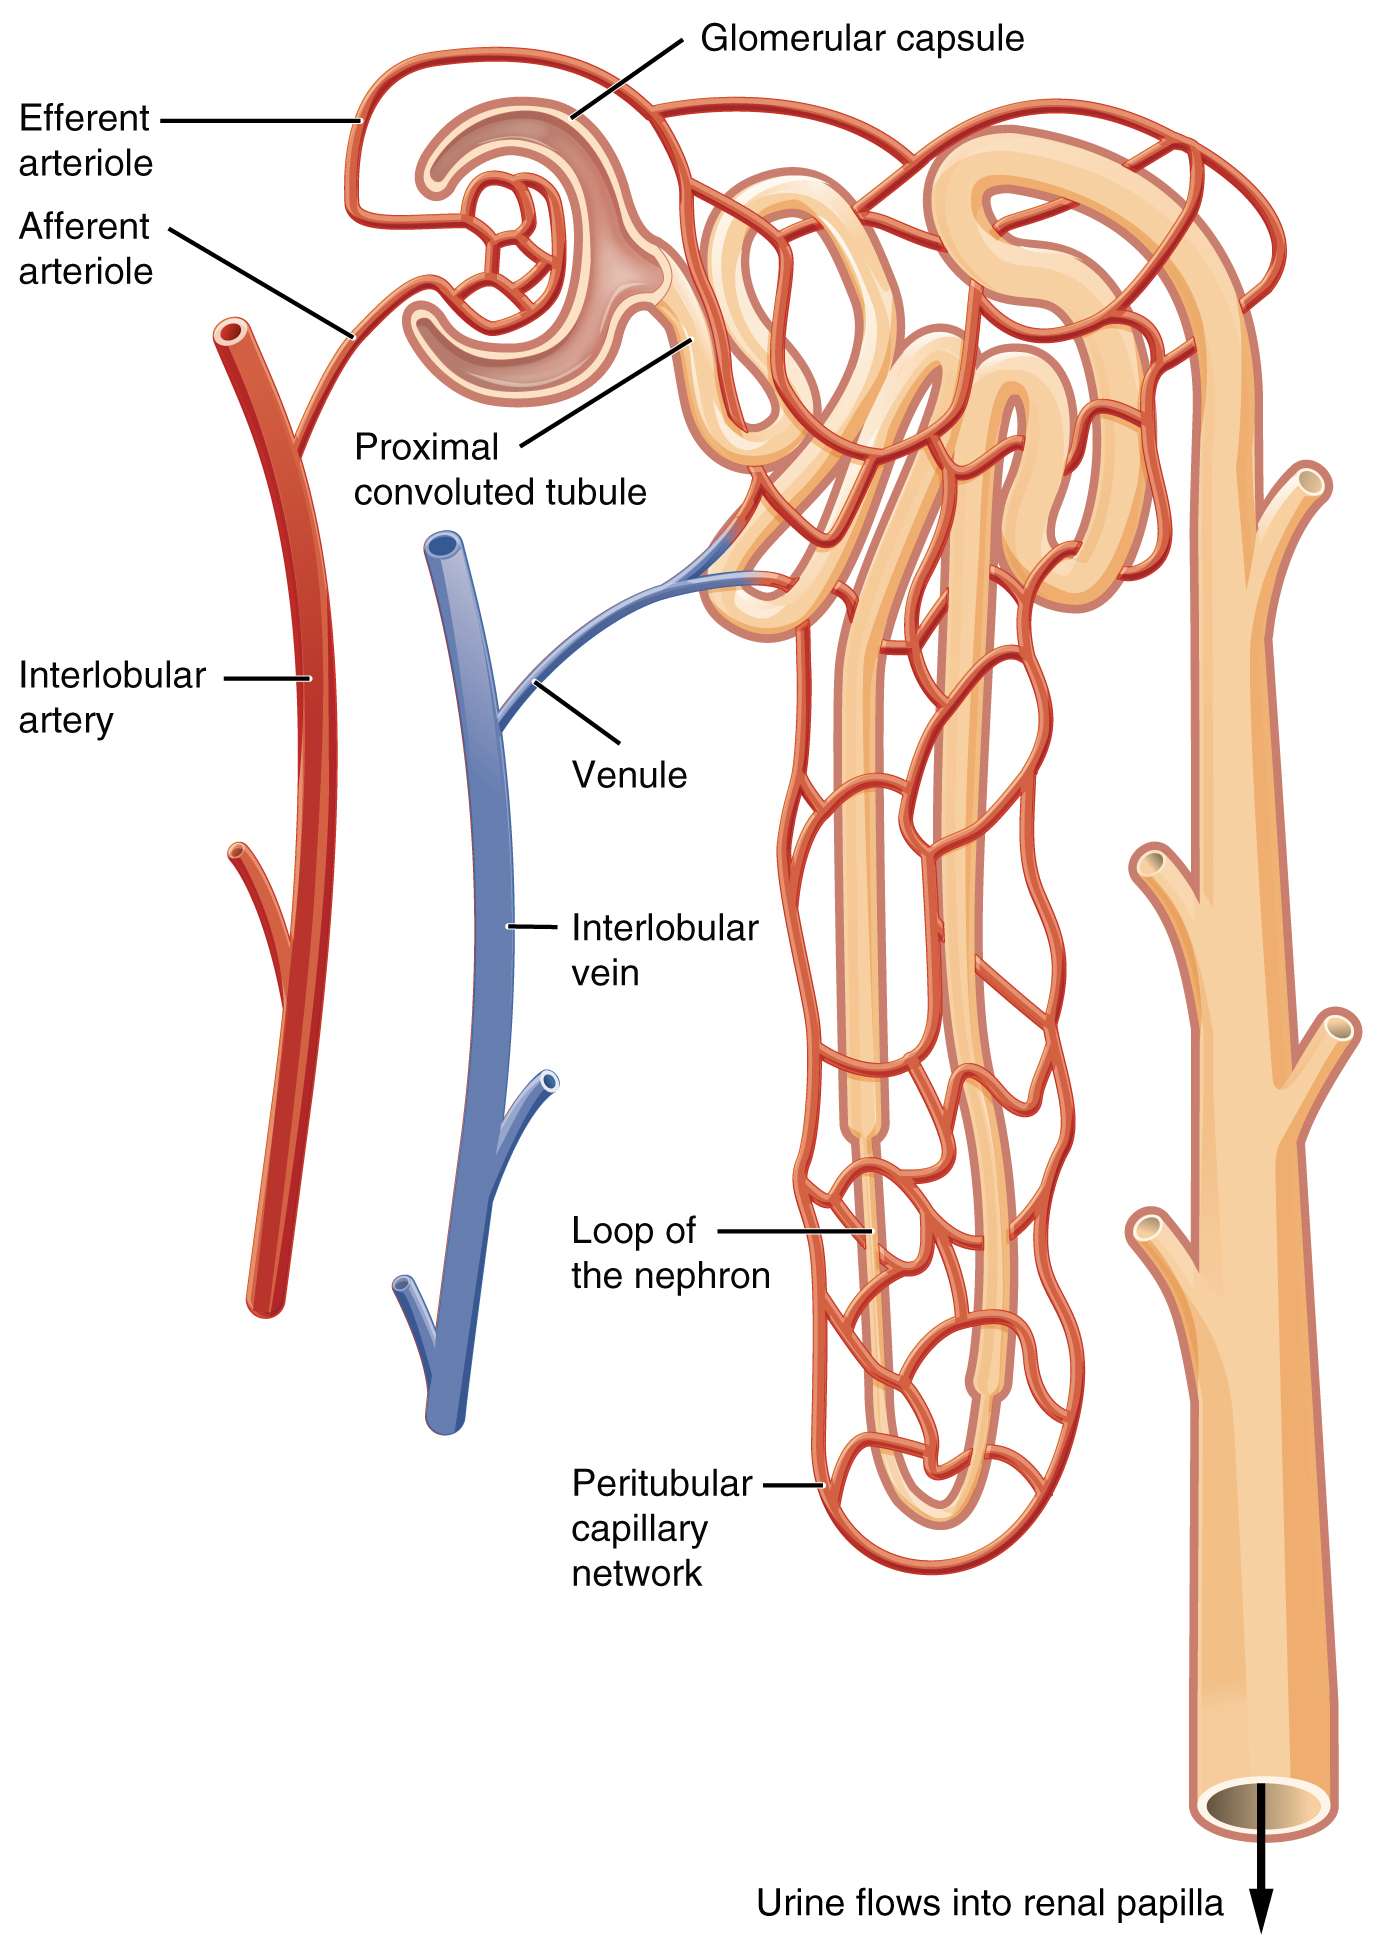 How does the functional unit of Kidney works (Nephron)? Give a detailed ...